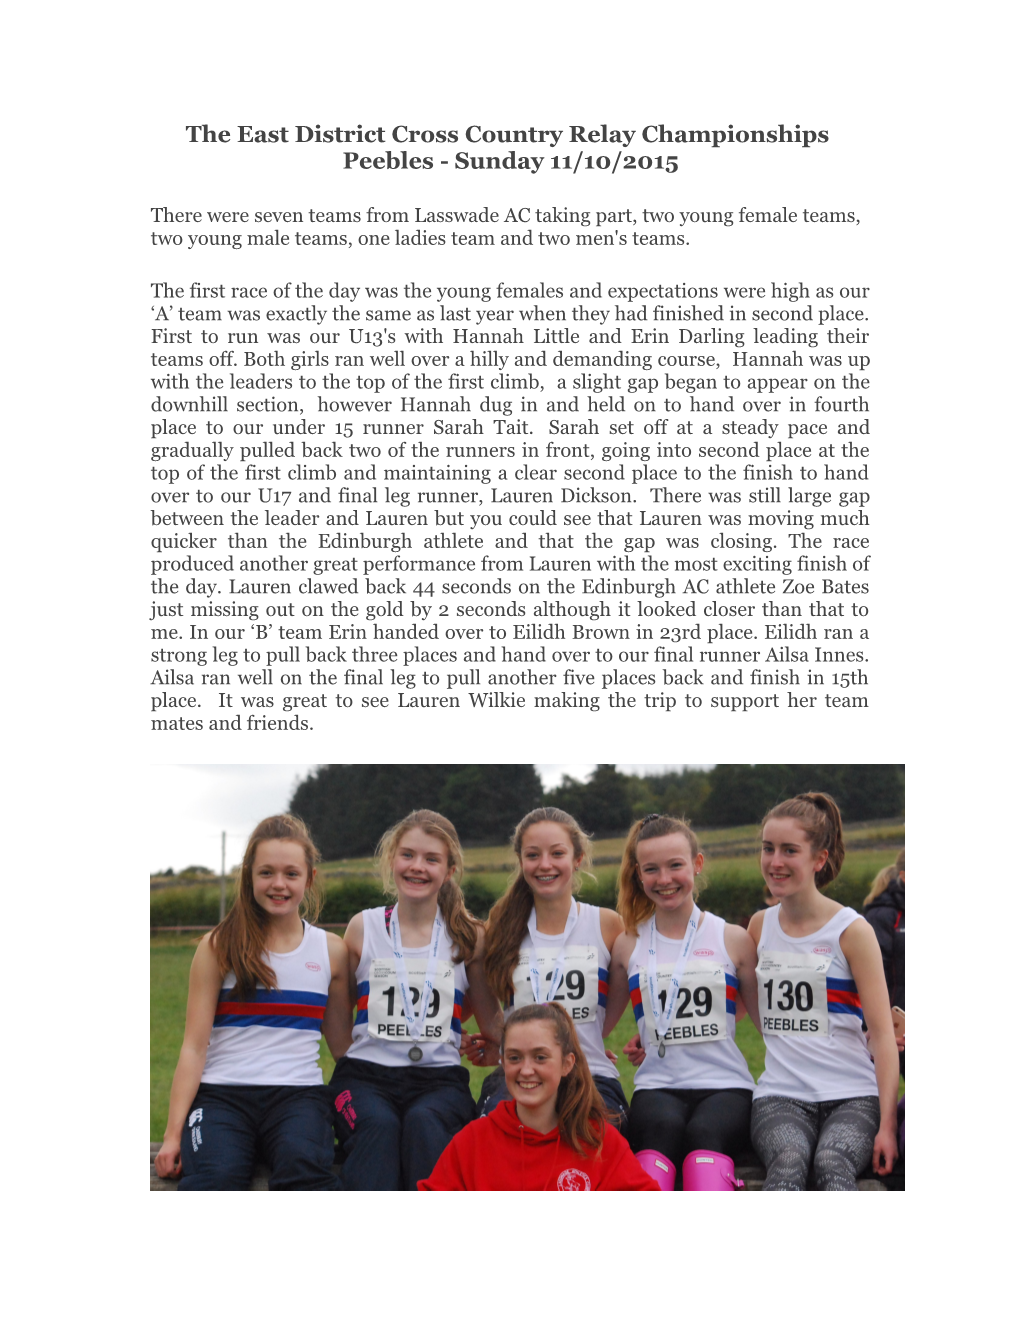 The East District Cross Country Relay Championships Took Place at Peebles on Sunday 11/10/2015